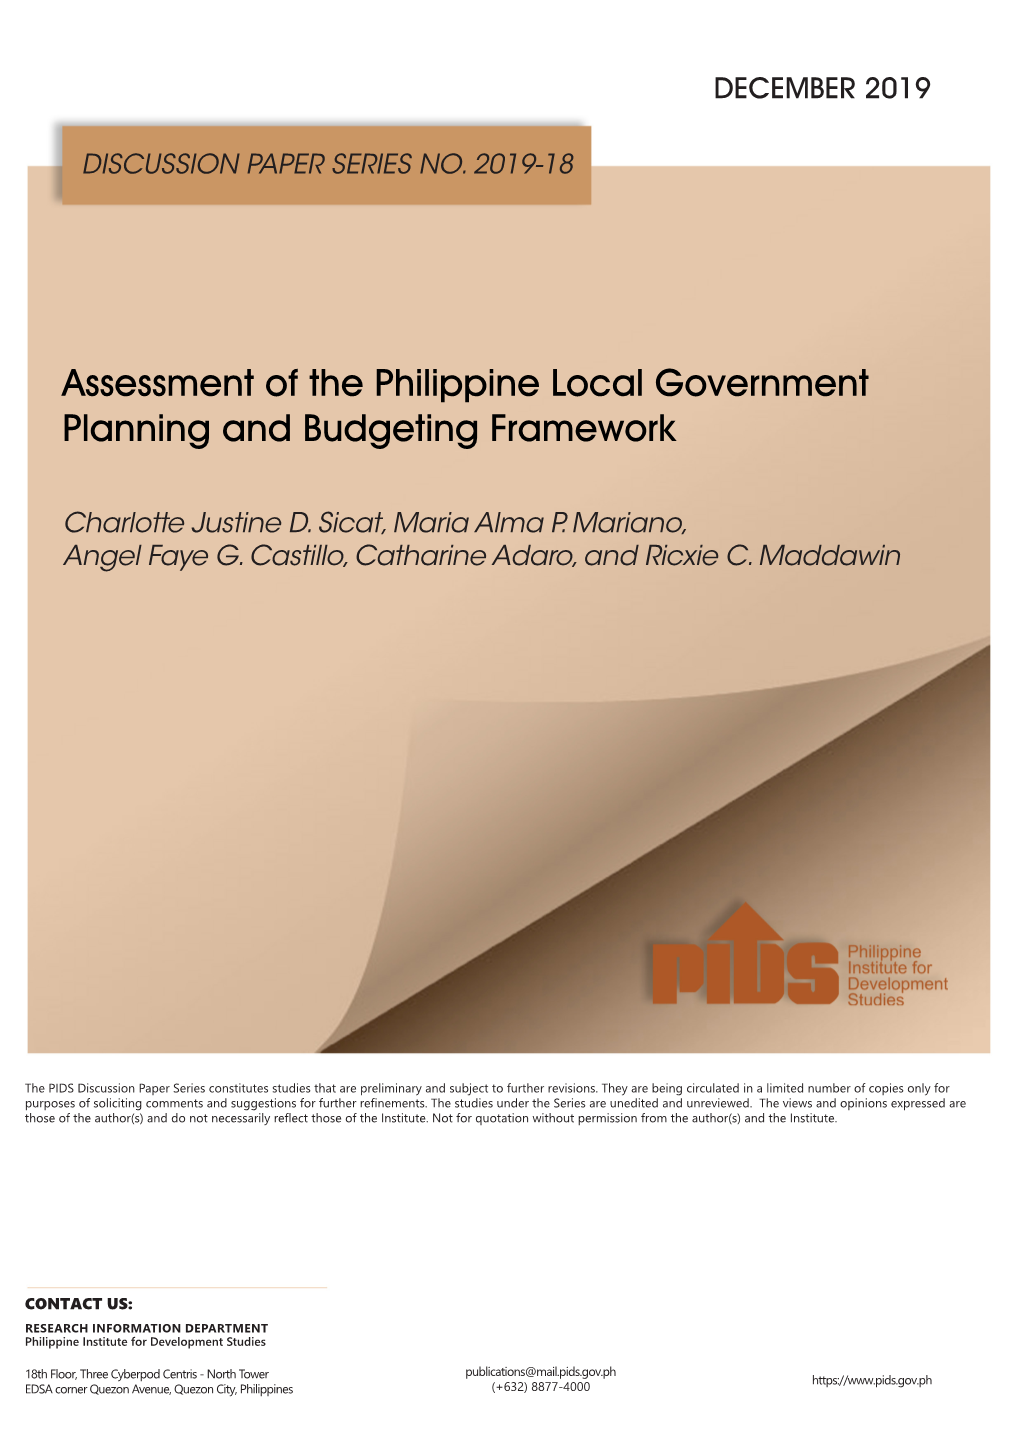 Assessment of the Philippine Local Government Planning and Budgeting Framework